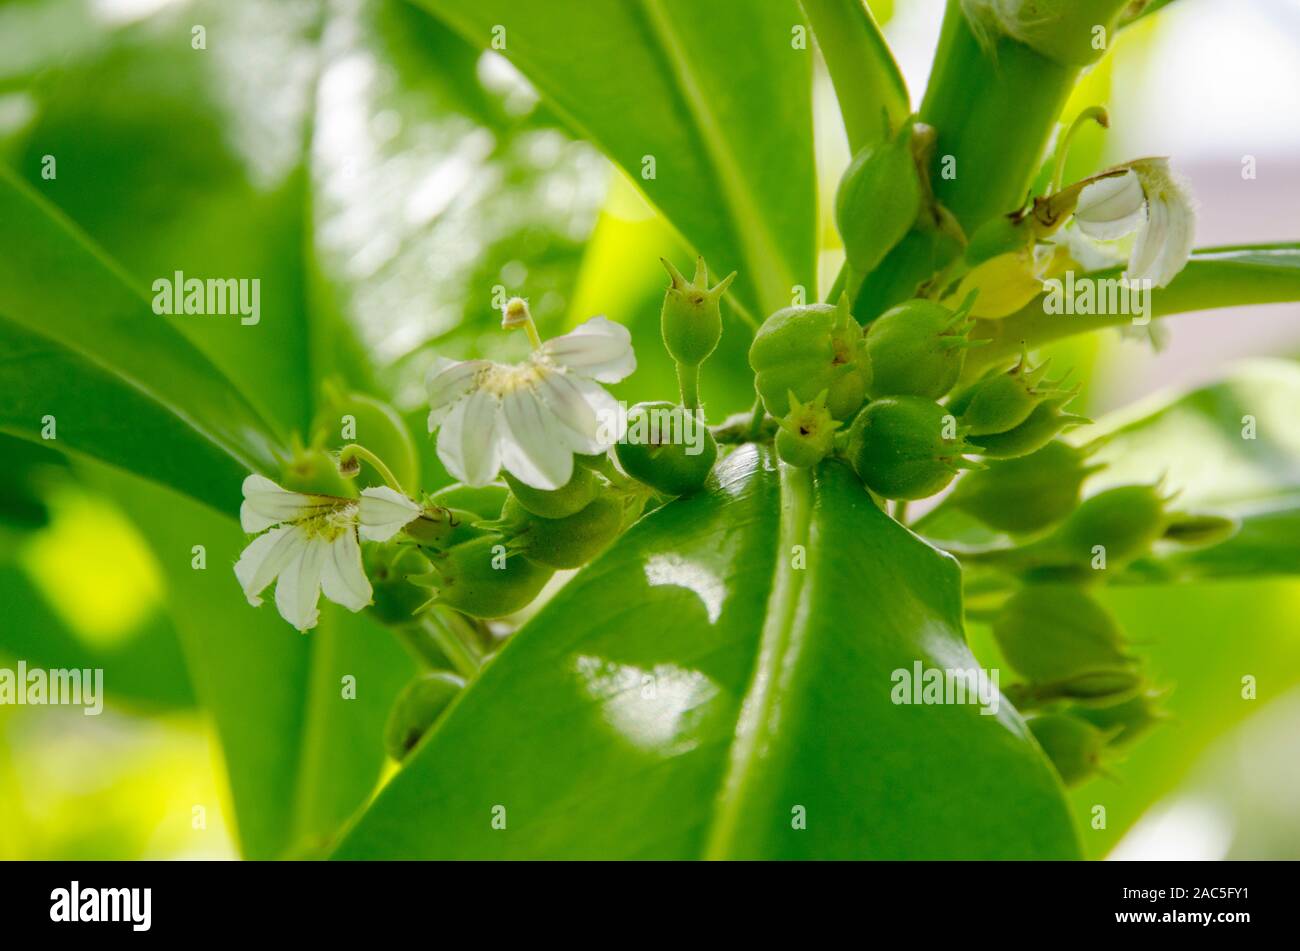 Naupaka kahakai is a half flower found near the beach which in Hawaiian legend represents the parting of two lovers. Another species of the same plant Stock Photo